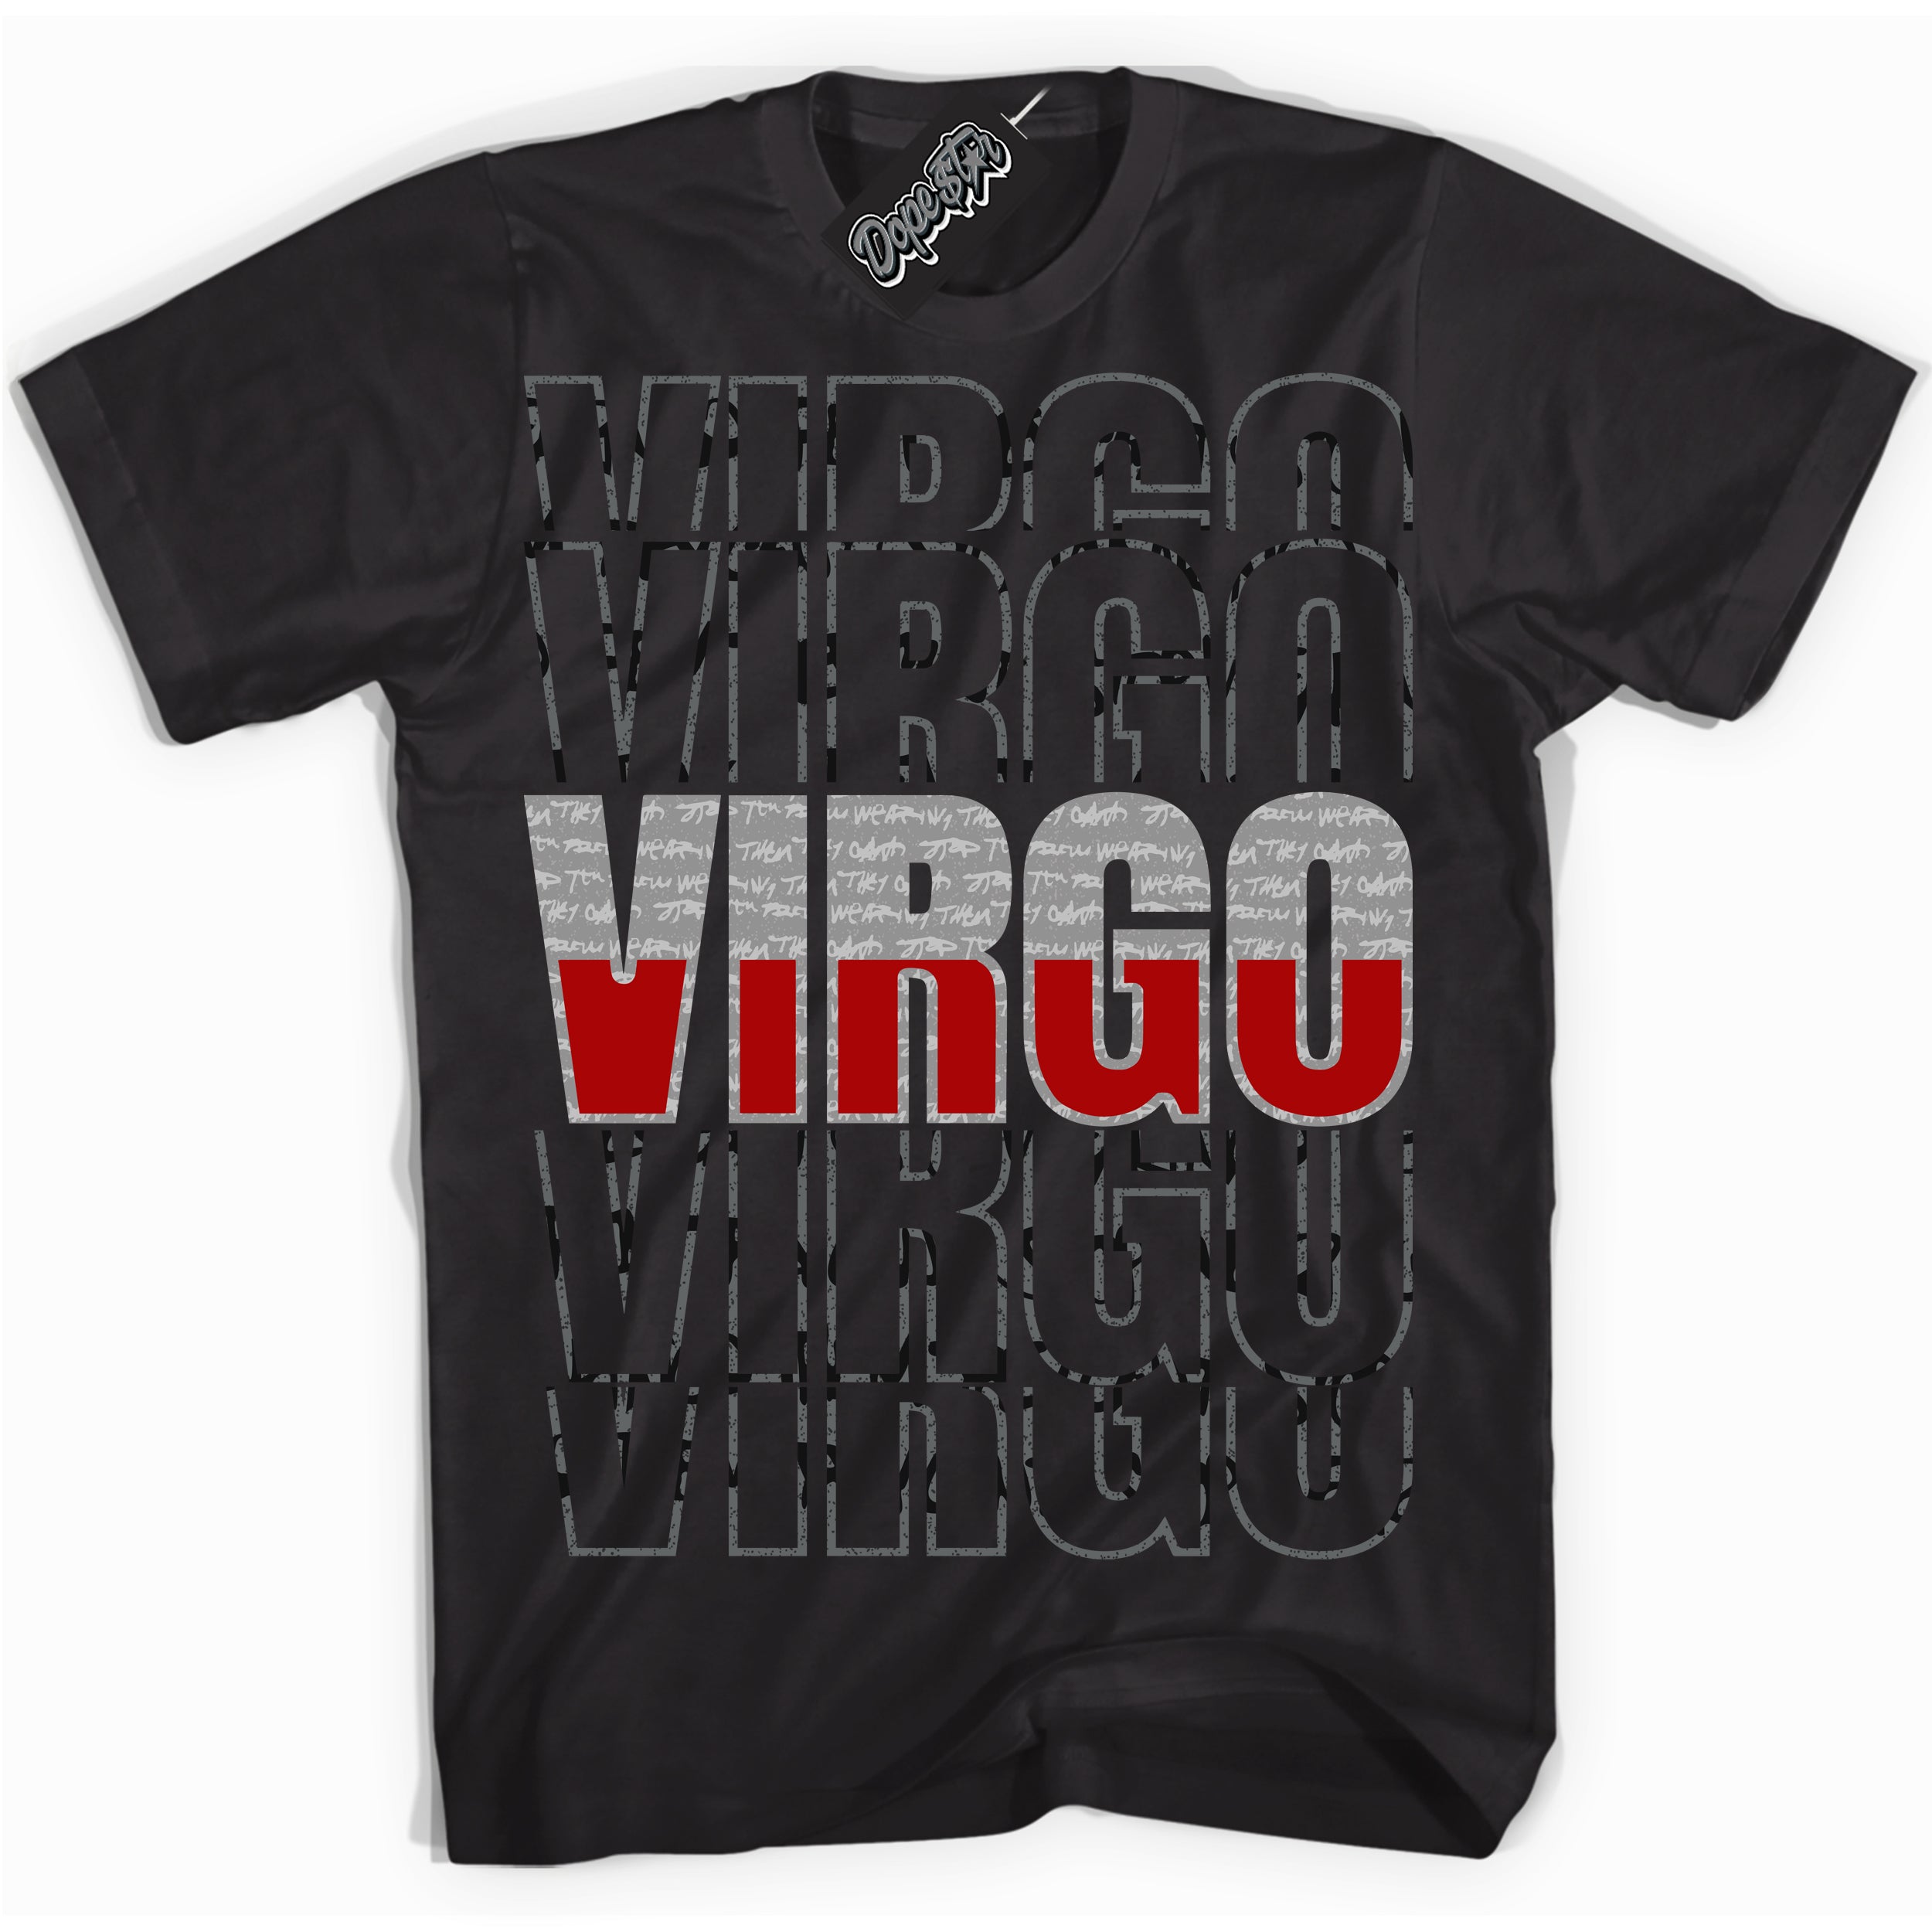 Cool Black Shirt with “ Virgo” design that perfectly matches Rebellionaire 1s Sneakers.